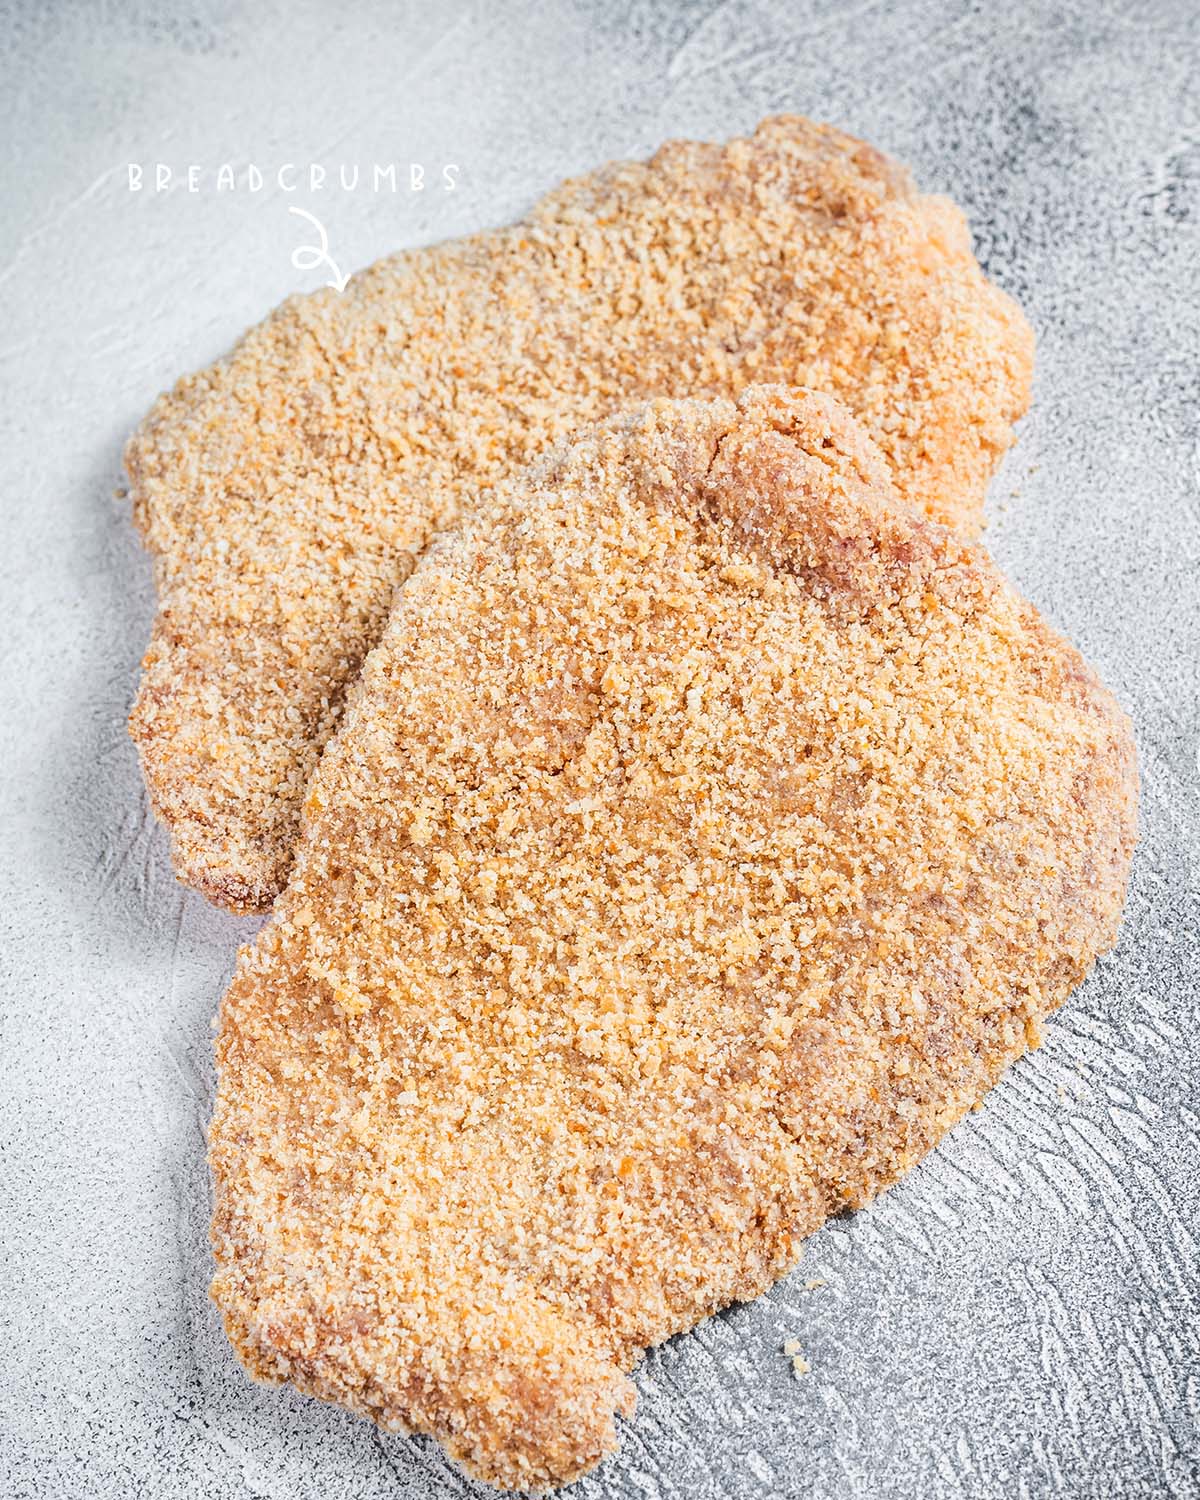 Other types of breadcrumbs, such as regular or Italian-seasoned, can be used in place of panko breadcrumbs. You can also use crushed crackers, cereal, or nuts as a substitute.